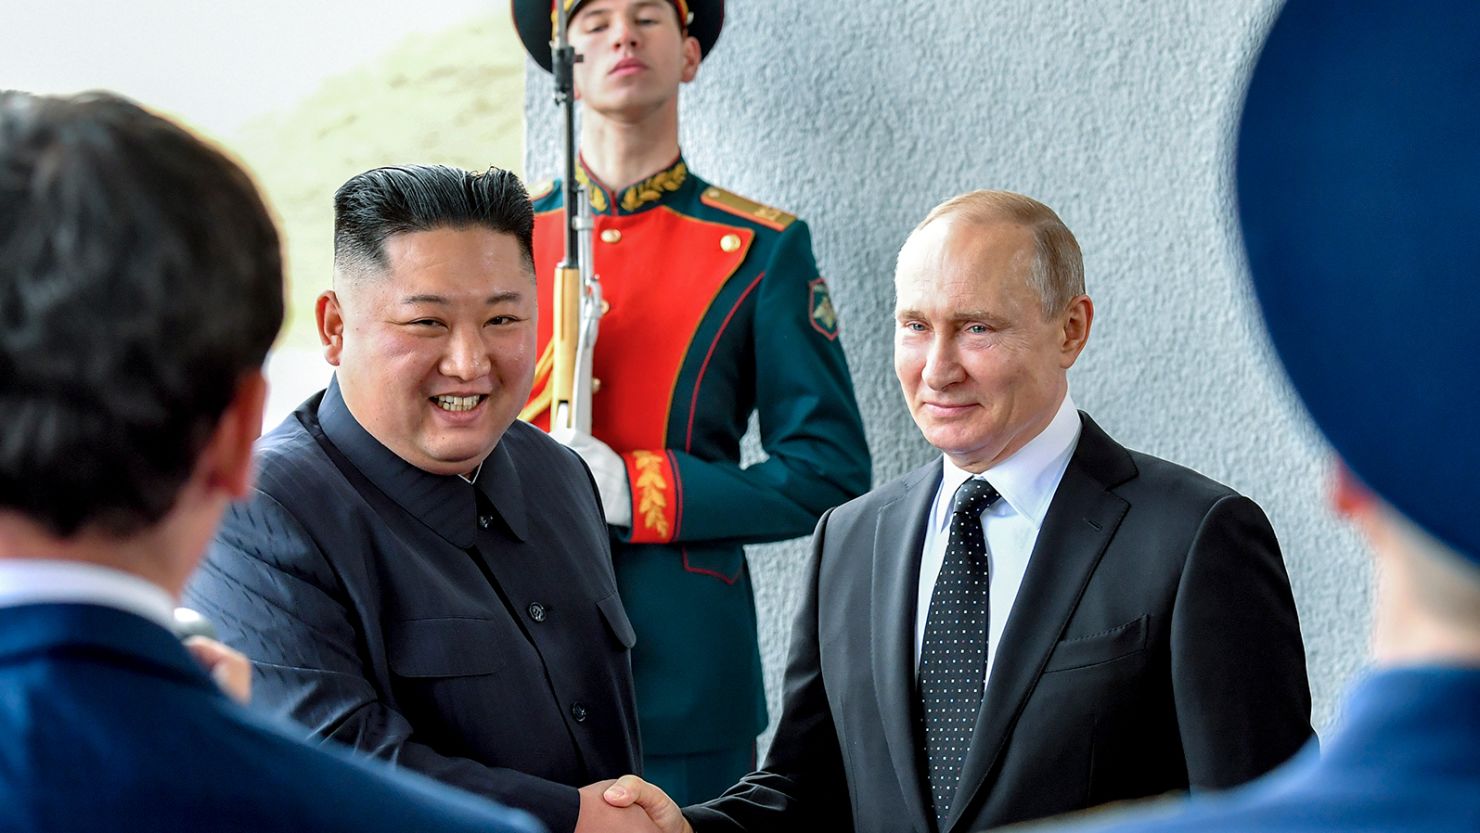 Russian President Vladimir Putin, right, and North Korea's leader Kim Jong Un shake hands during their meeting in Vladivostok, Russia, on April 25, 2019. A